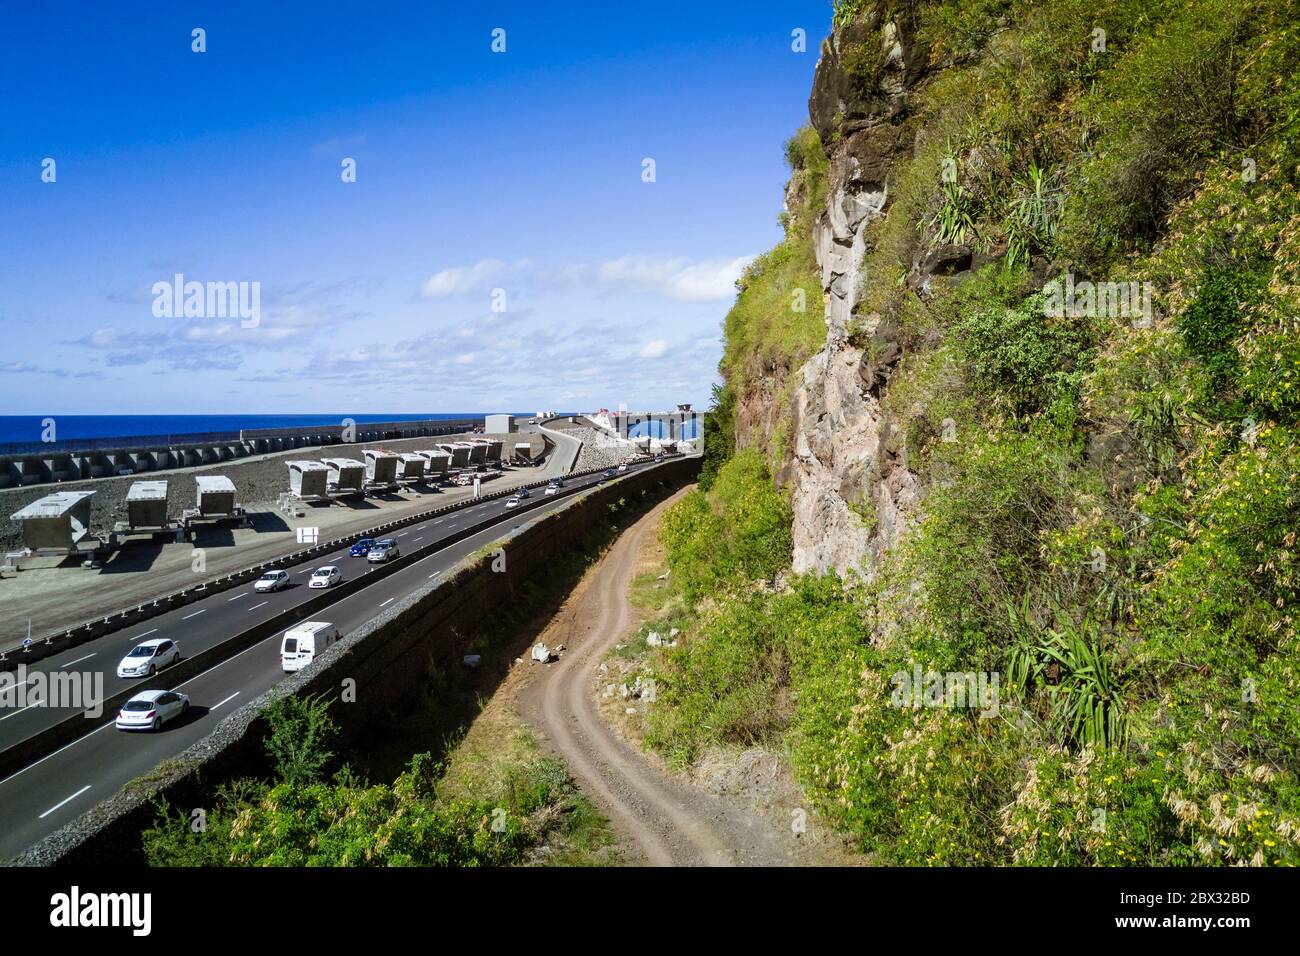 France, Reunion island (French overseas department), La Possession, construction of the New Coastal Route ( Nouvelle Route du Littoral